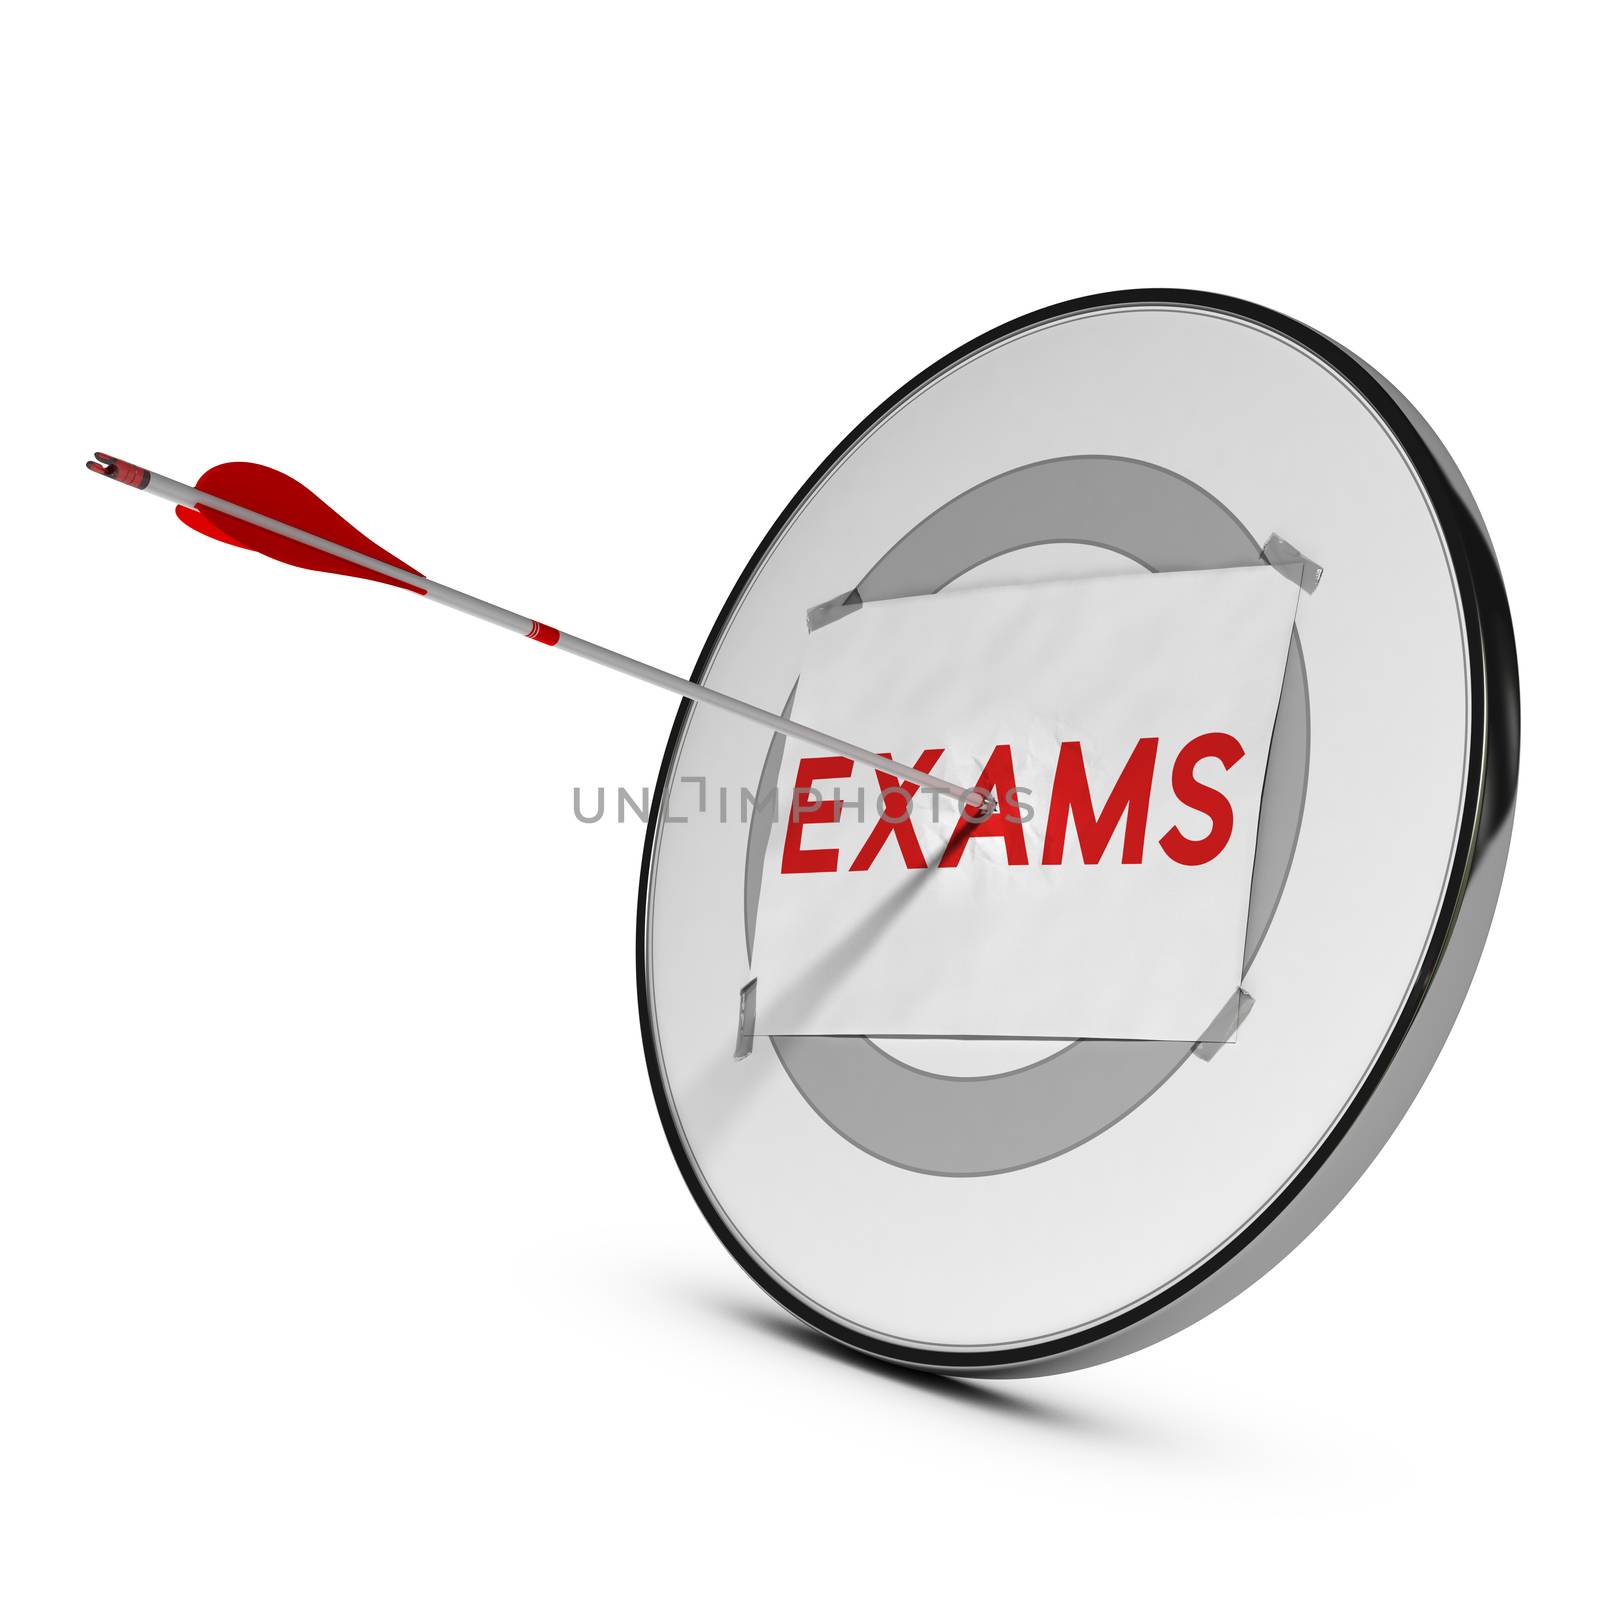 3d illustration of a target and one arrow reaching the center of the word exams over white background. Concept examinations success.